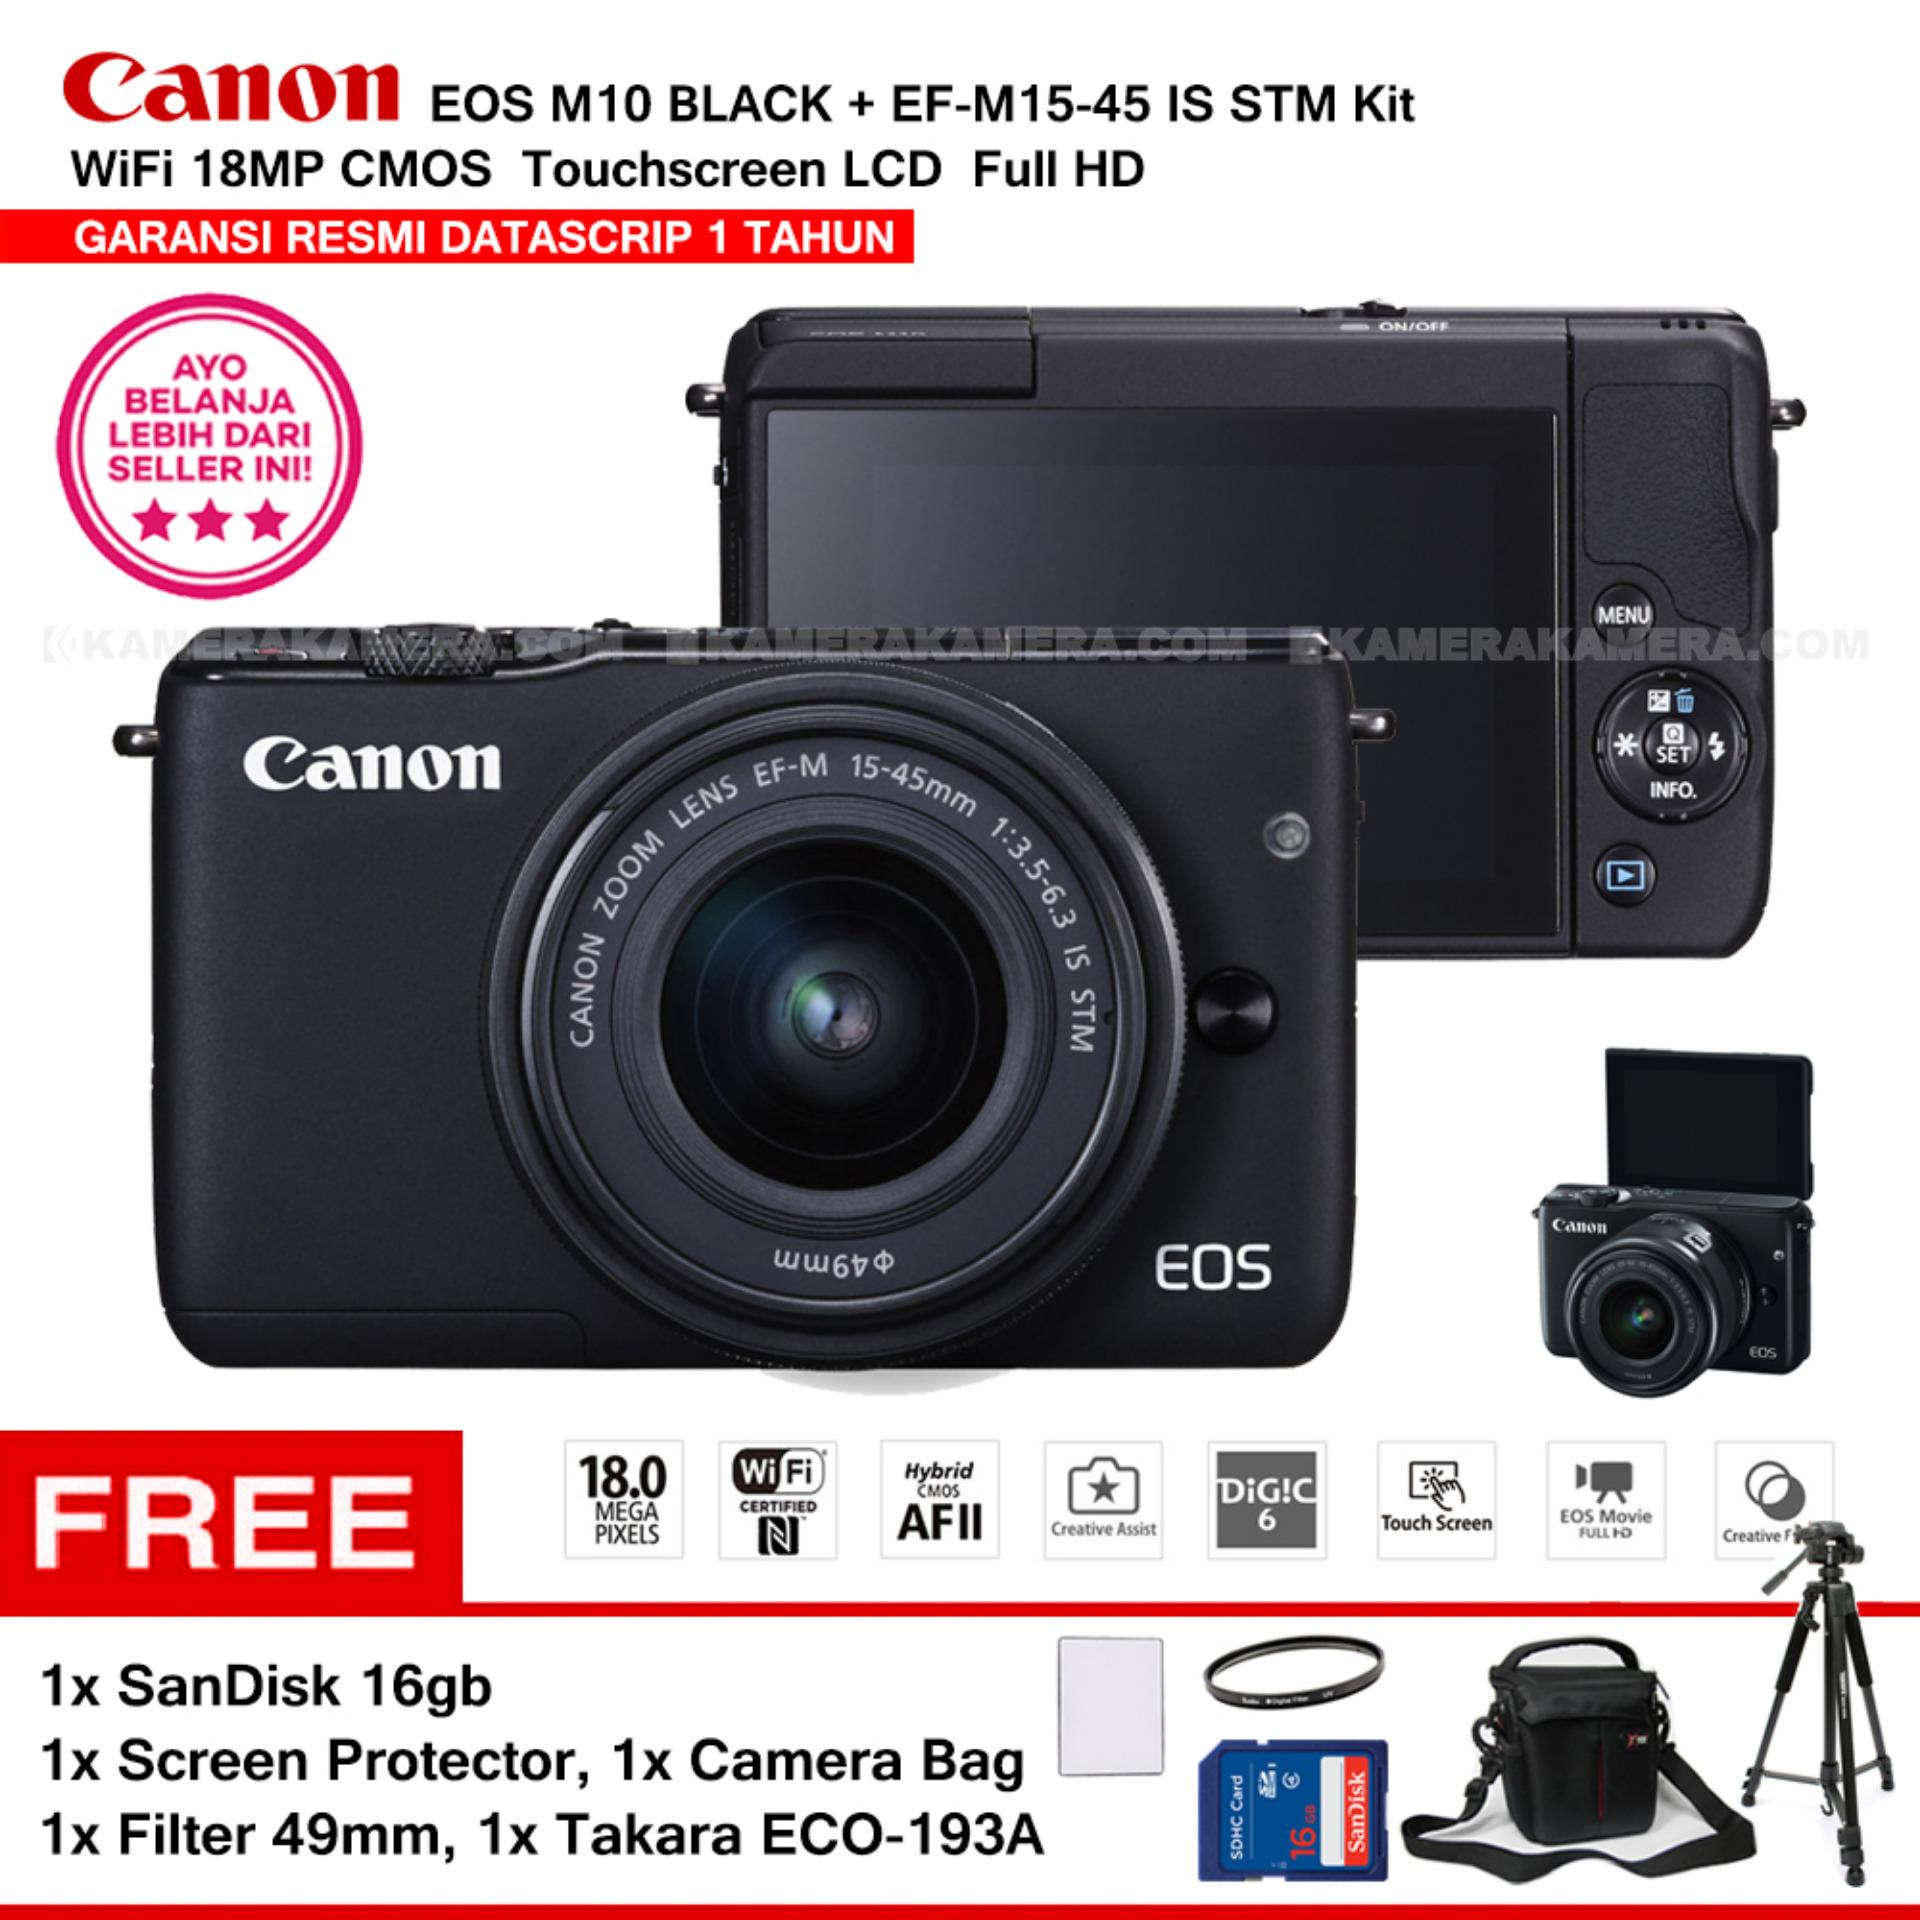 CANON EOS M10 BLACK (EF-M15-45 IS STM) WiFi 18MP CMOS Touchscreen LCD Full HD (Resmi Datascrip) + SanDisk 16gb + Screen Protector + Filter 49mm + Camera Bag + Takara ECO-193A